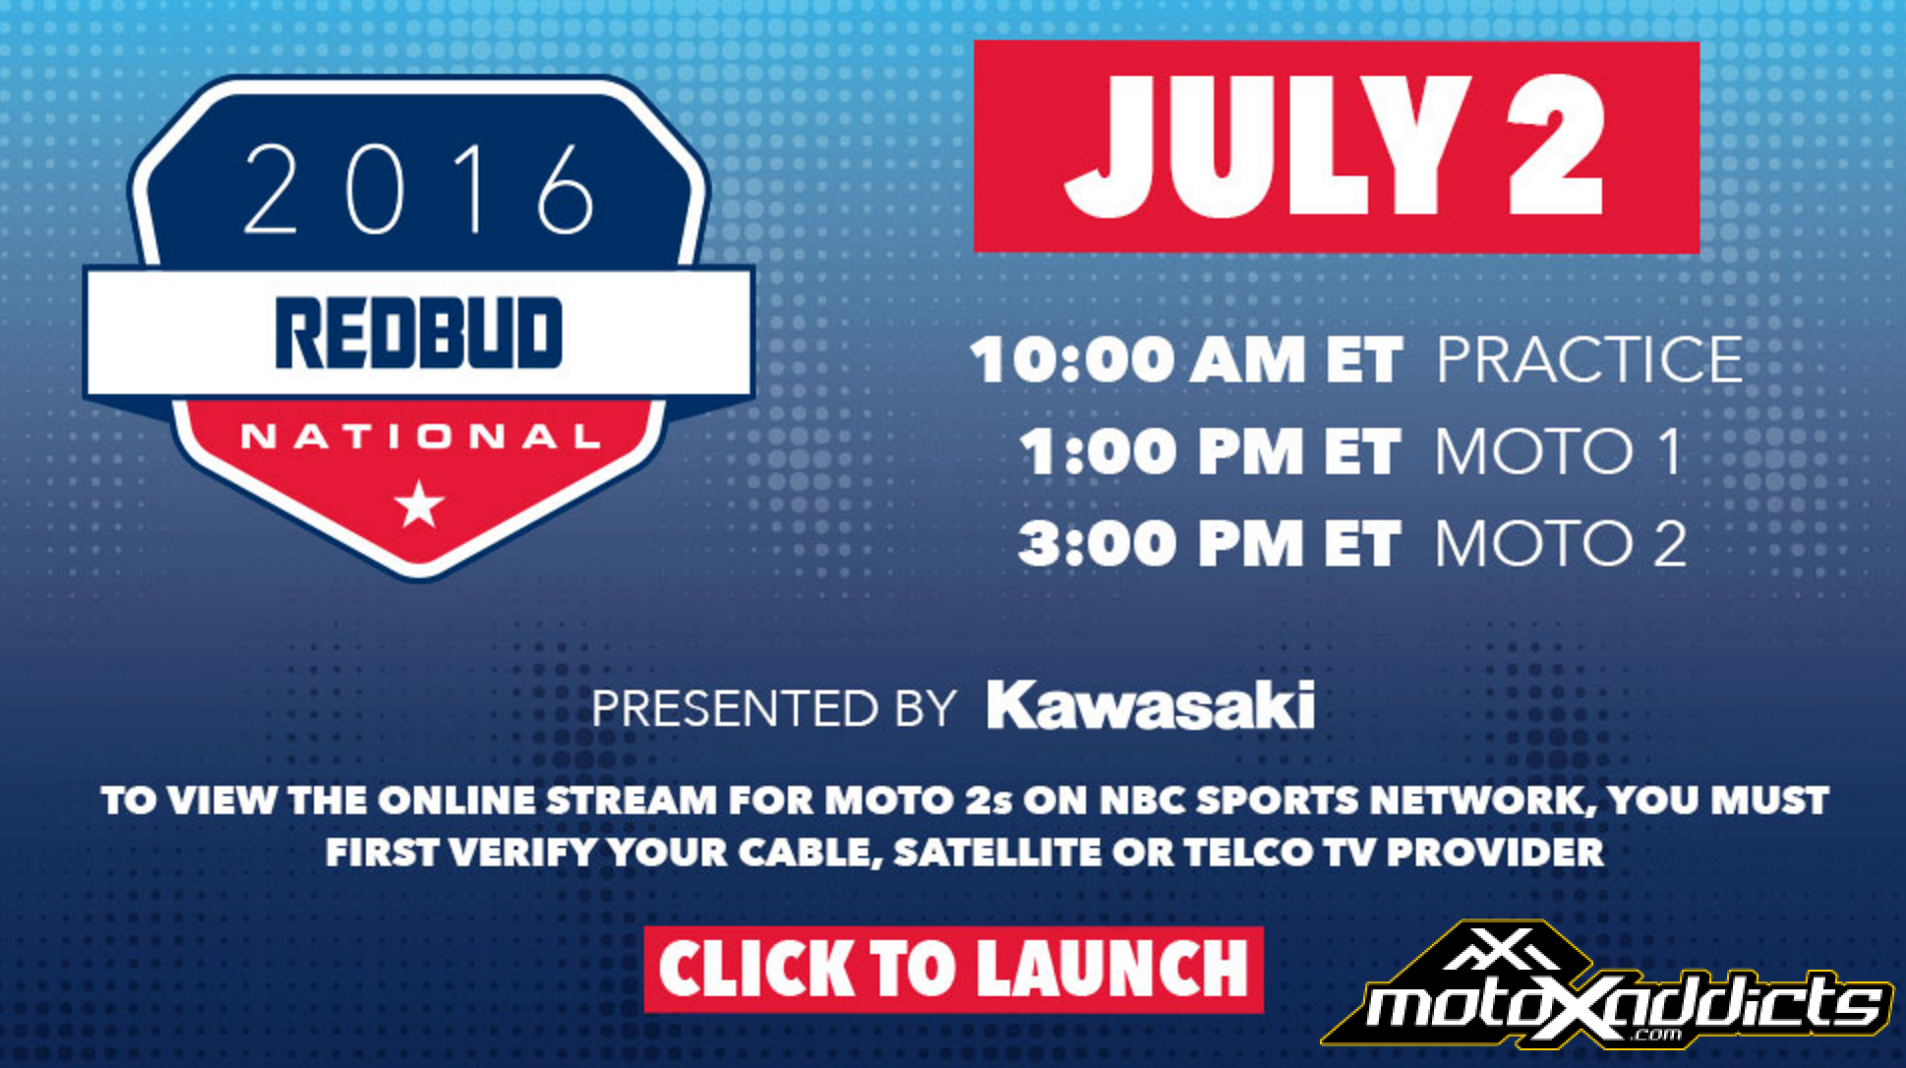 motoxaddicts | 2016 redbud national tv and internet broadcast schedule